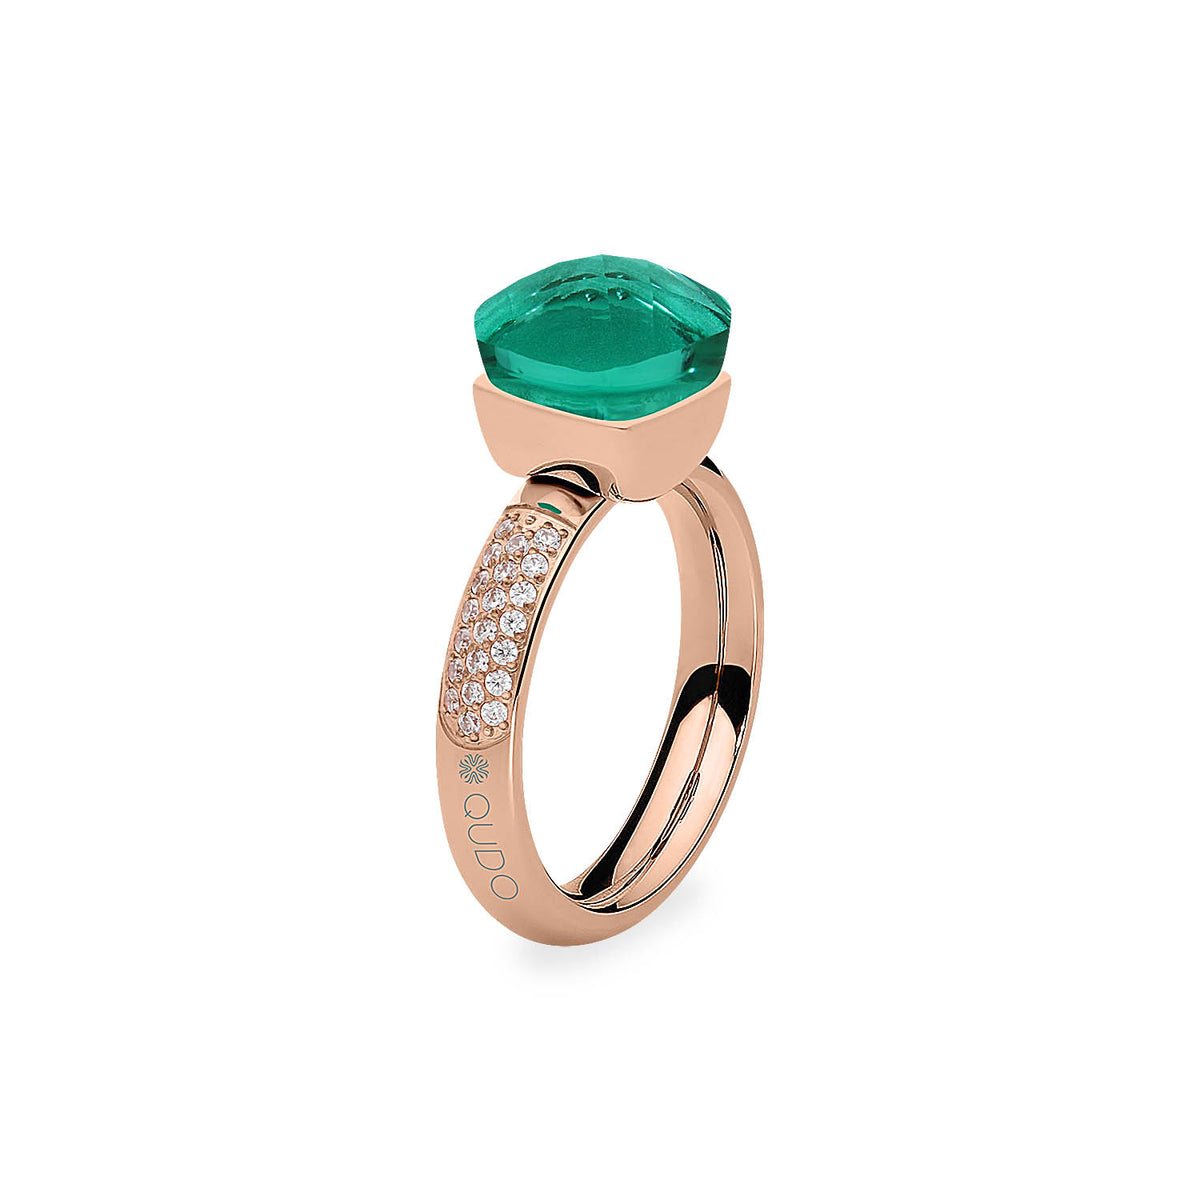 Firenze Deluxe Ring - Shades of Green & Brown - Roségold